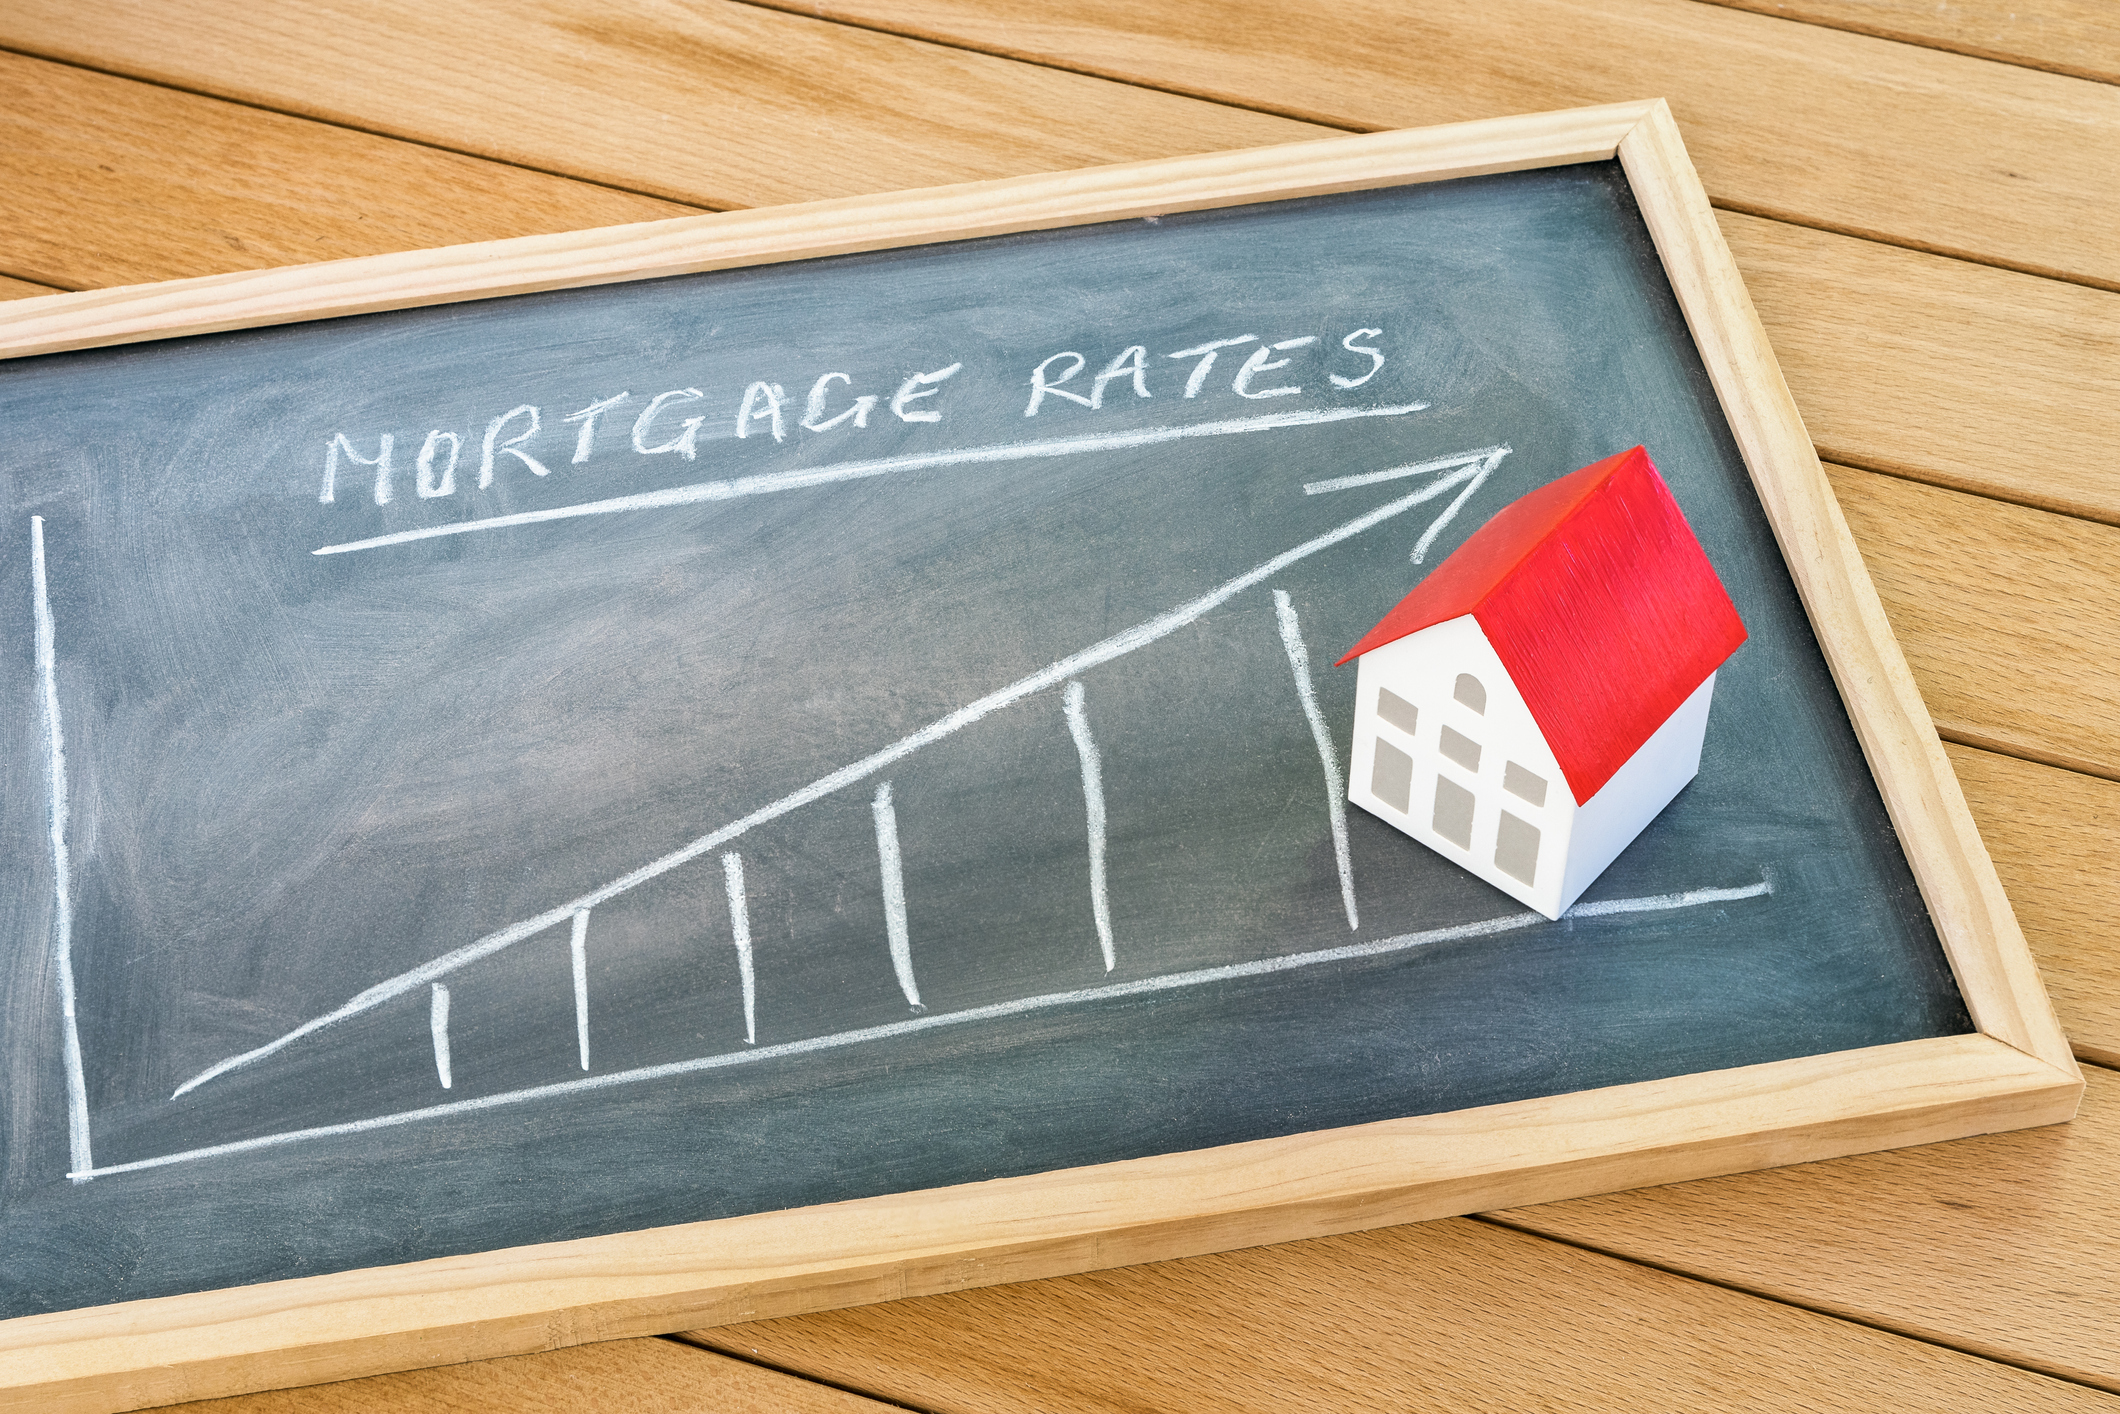 Higher mortgage rates hurting North Texas housing affordability